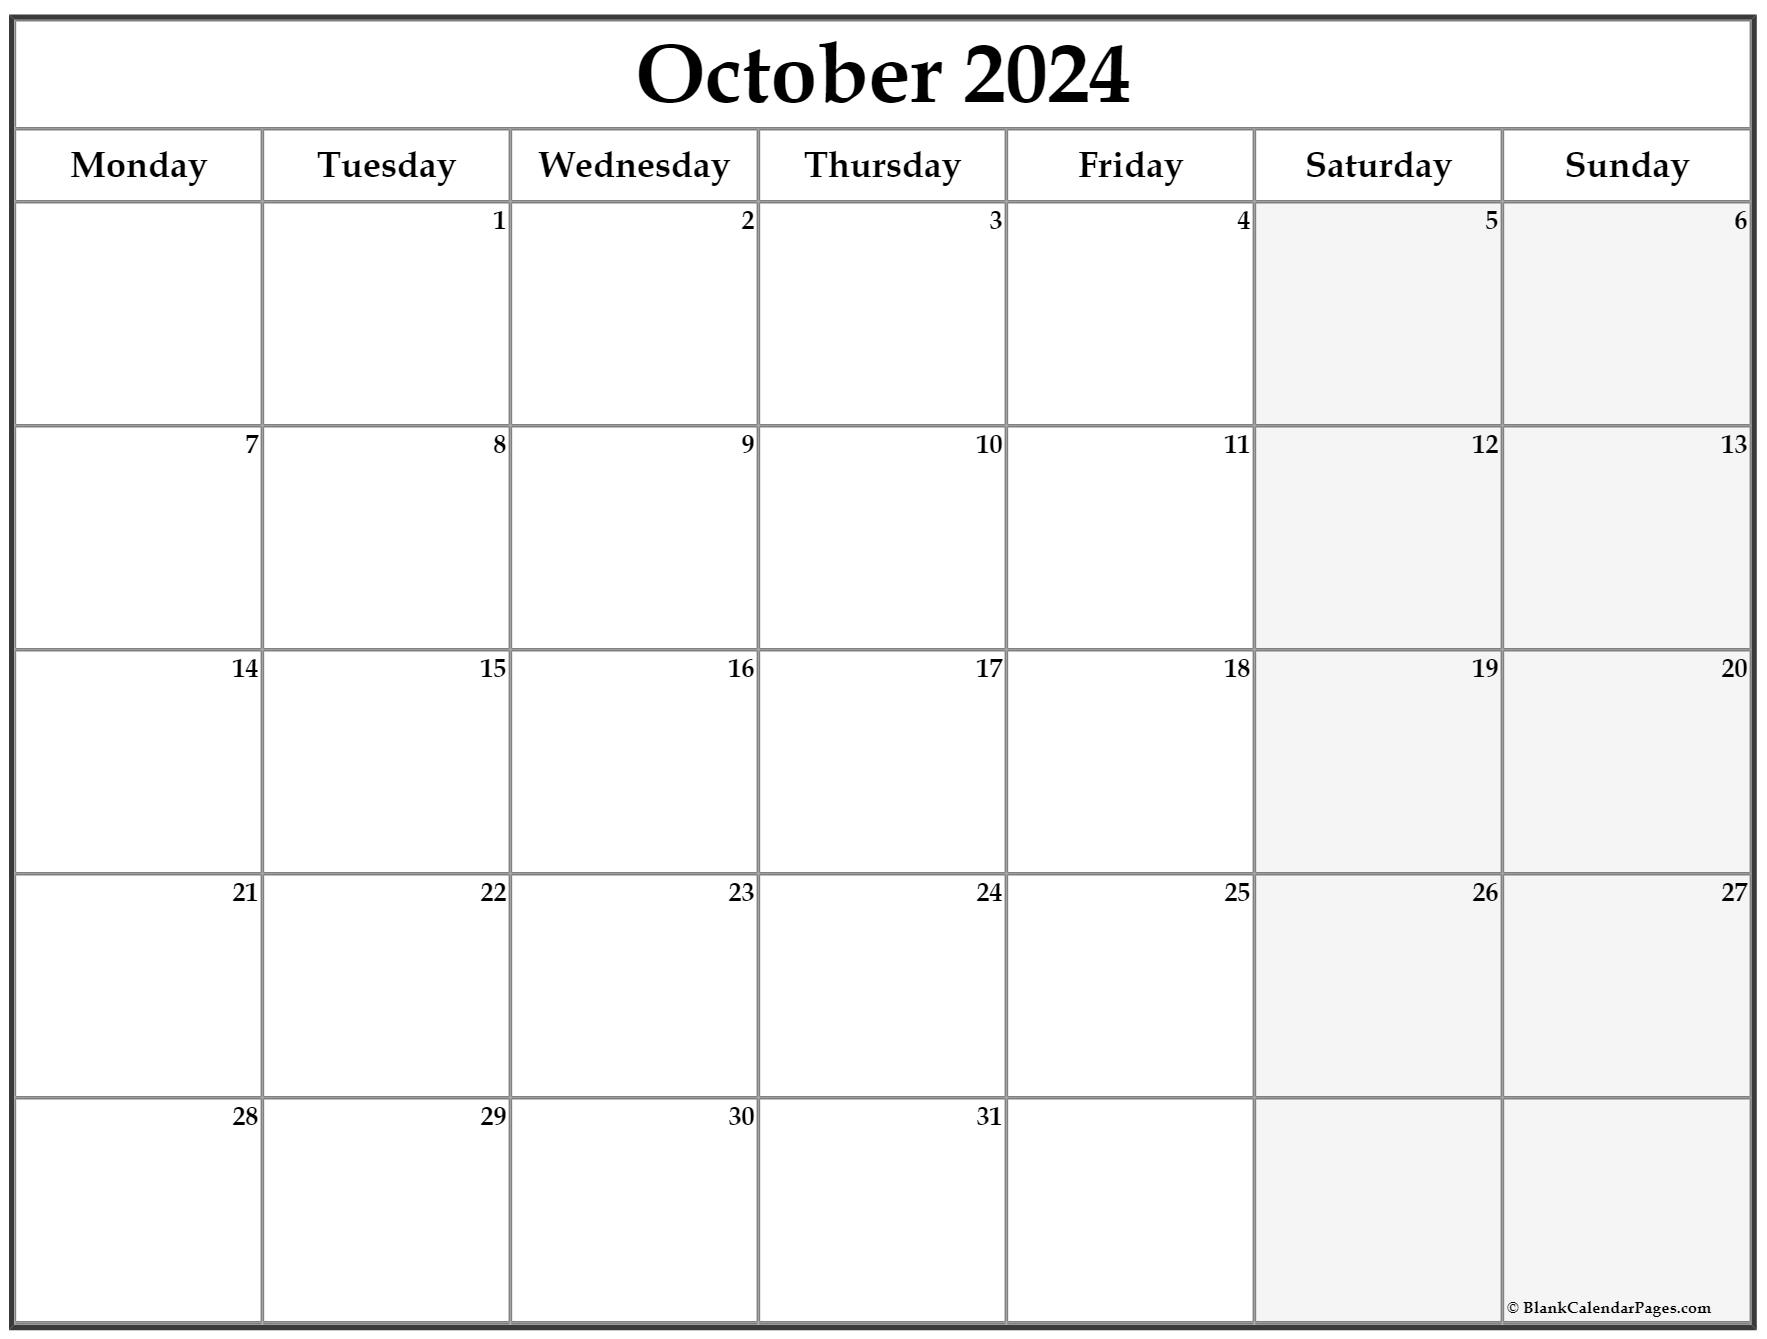 Monday Through Sunday Calendar Template from blankcalendarpages.com